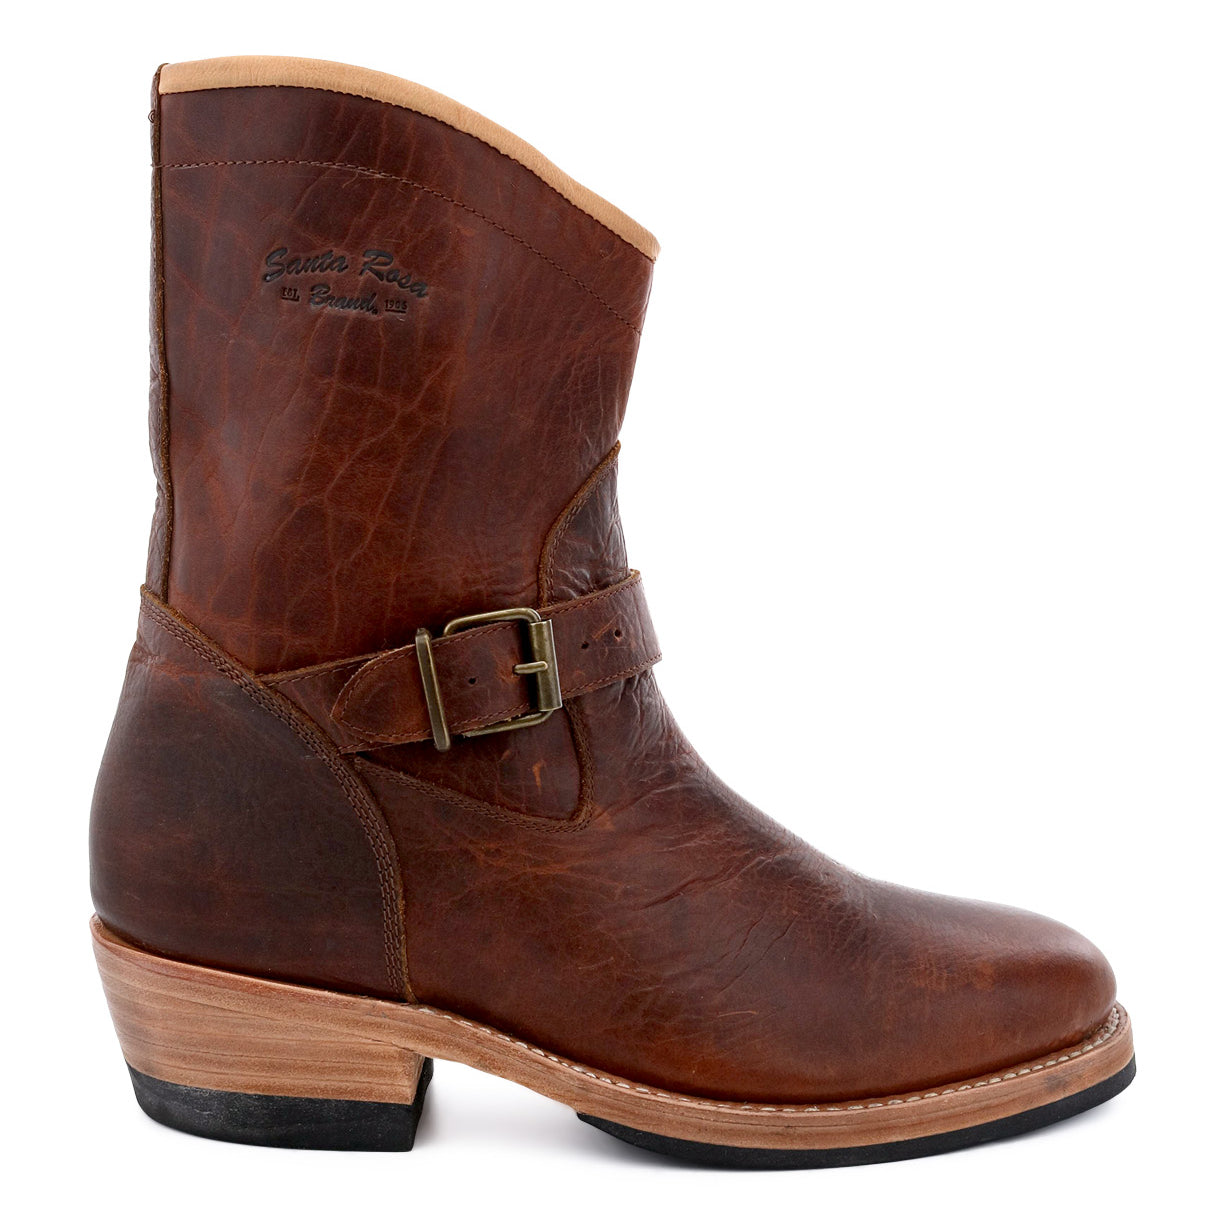 Santa Rosa Brand Carson Harness Boot in brown full grain leather with buckle detail.